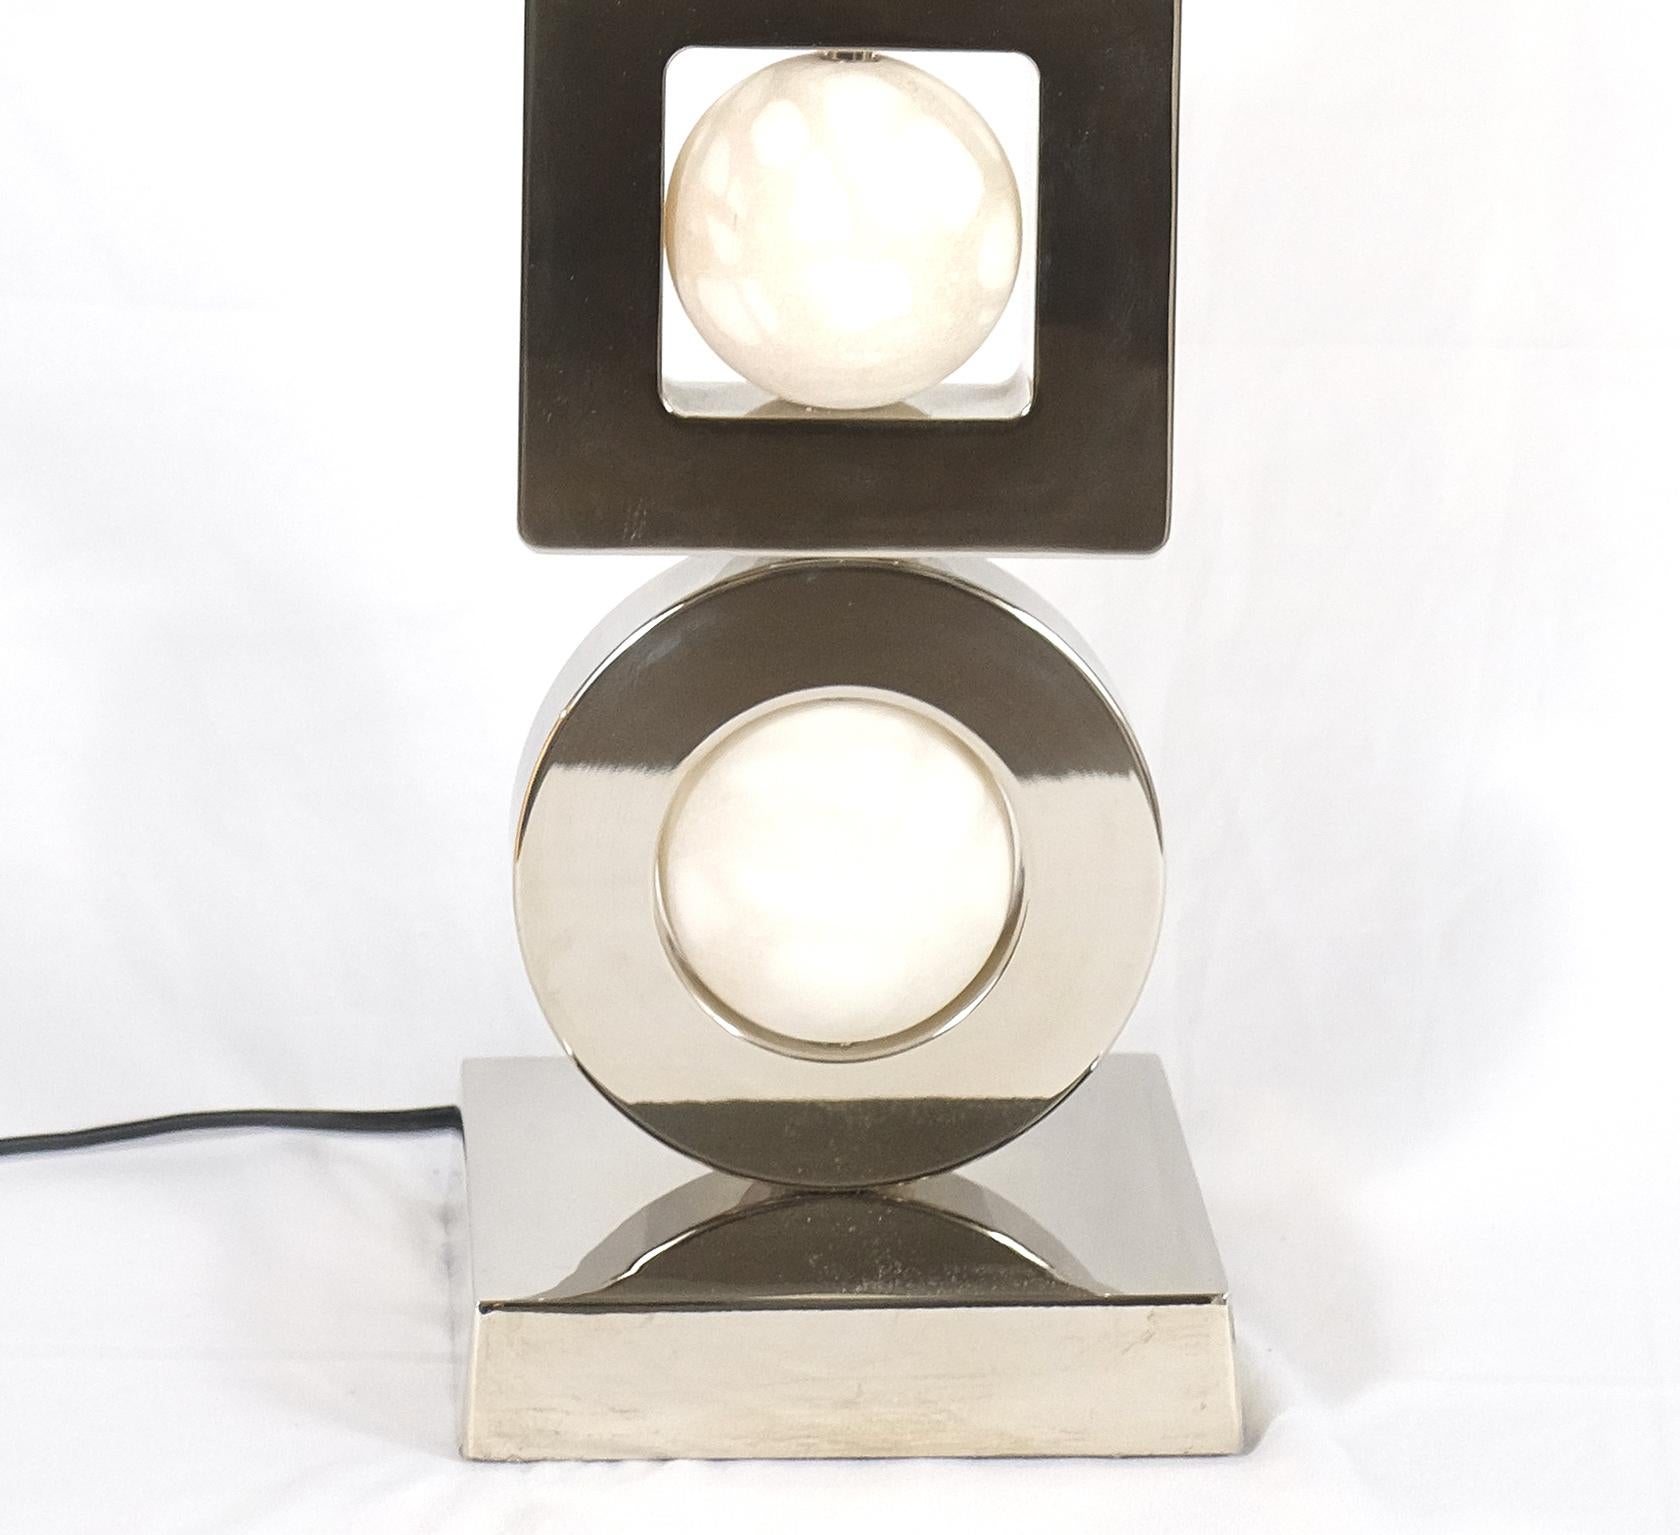 Polished Laudarte Srl Andromeda Table Lamps by Attilio Amato, Pair Available , Vintage  For Sale